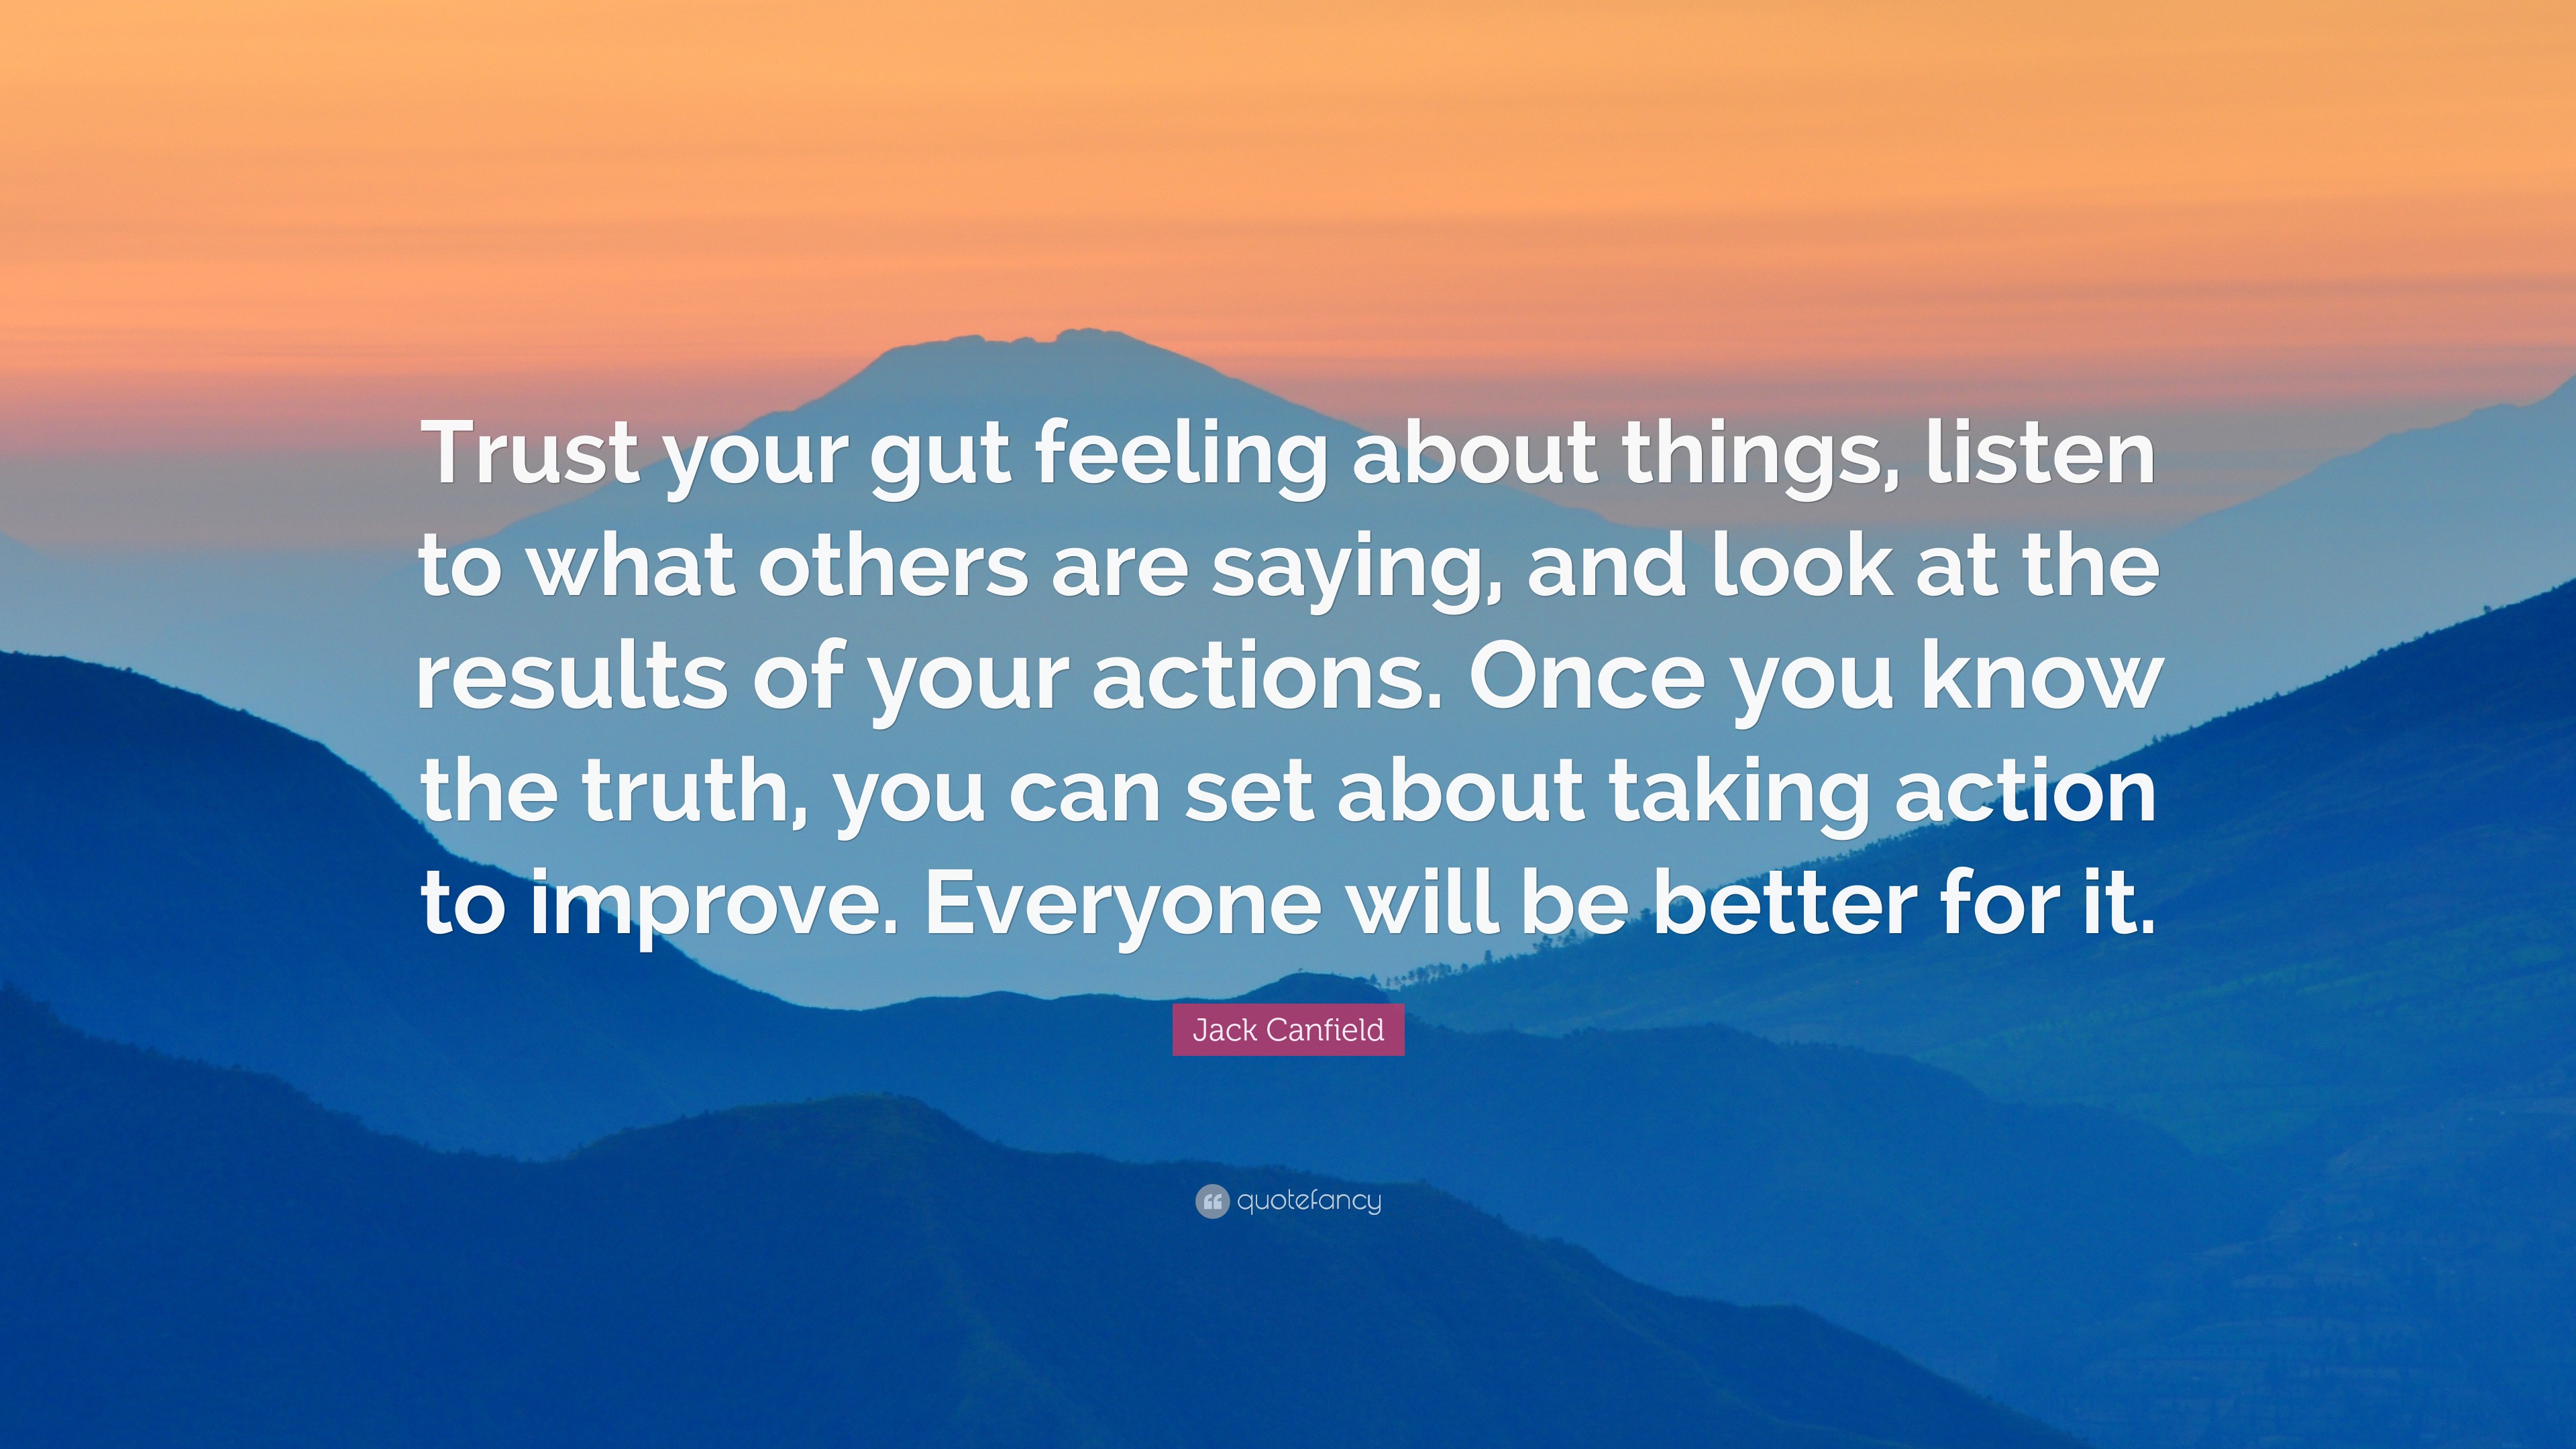 Jack Canfield Quote: “Trust your gut feeling about things, listen to ...